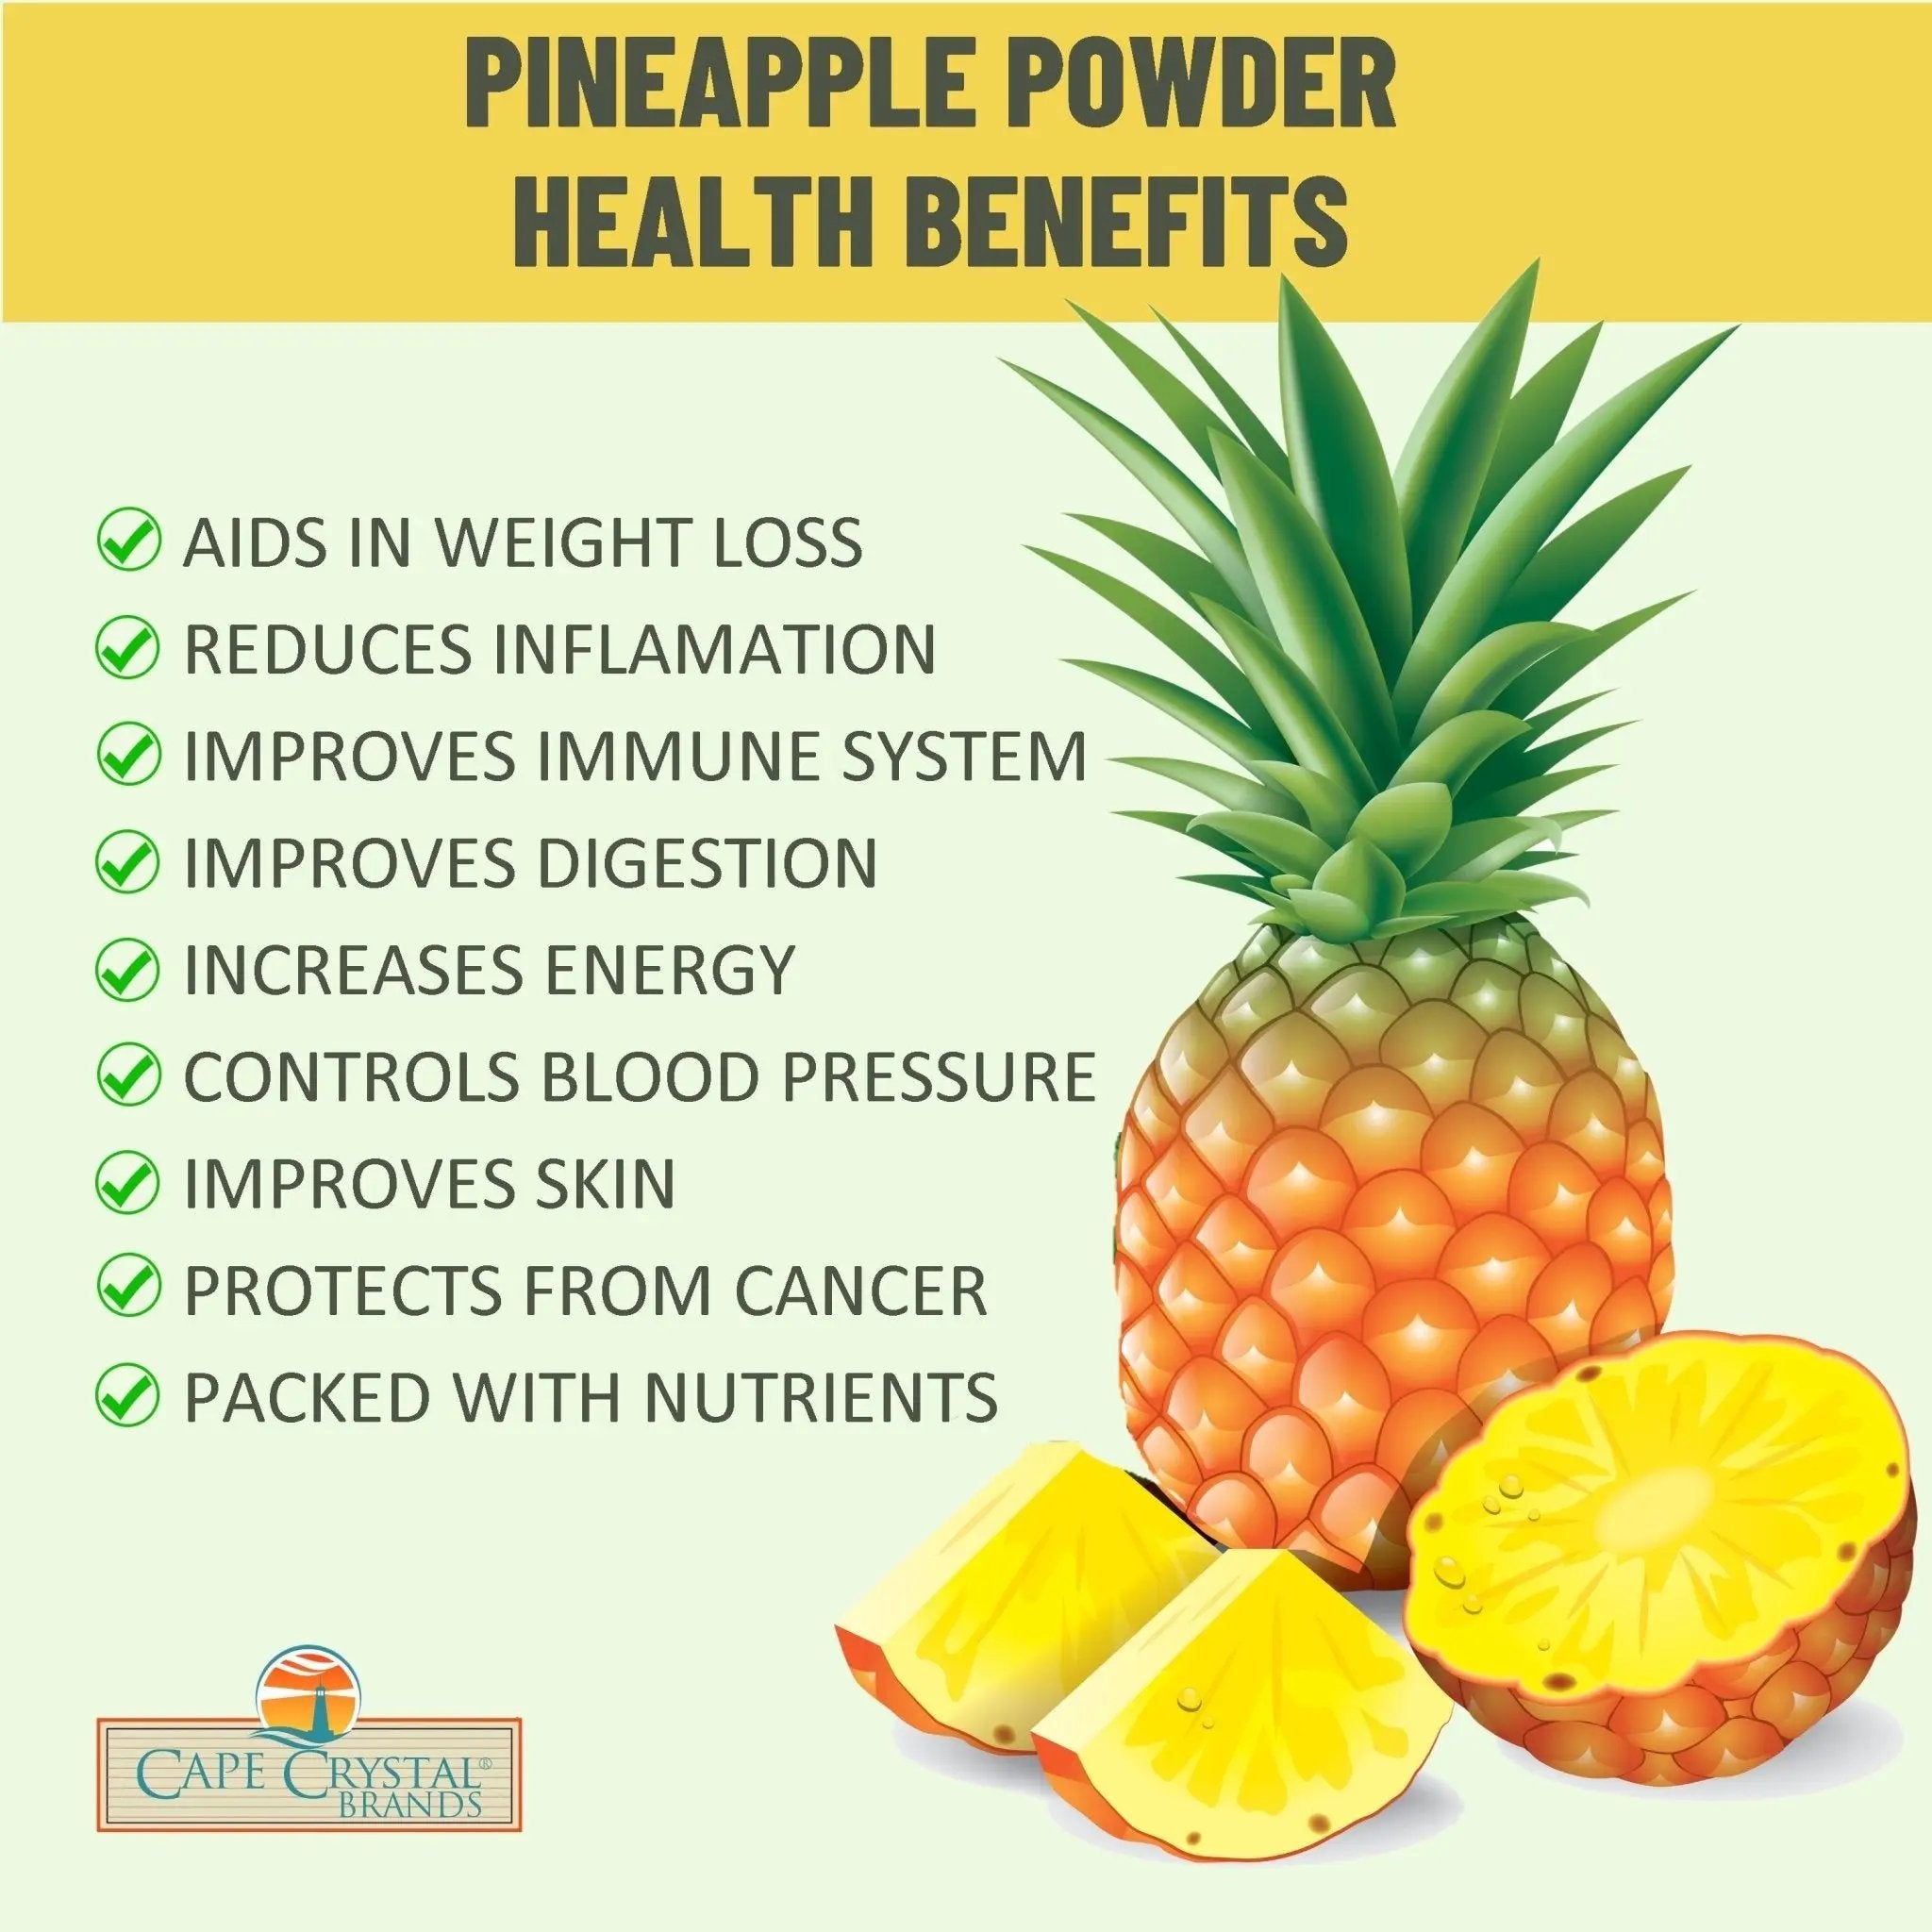 Cape Crystal Pineapple Powder, 8 Ounce, USDA Certified Organic, Non-GMO, Vegan, Freeze-Dried, High in Inflammation Reducing Bromelain and a Rich Immune System Booster, Wonderful Flavoring for Drinks, Baking and Cooking - Cape Crystal Brands